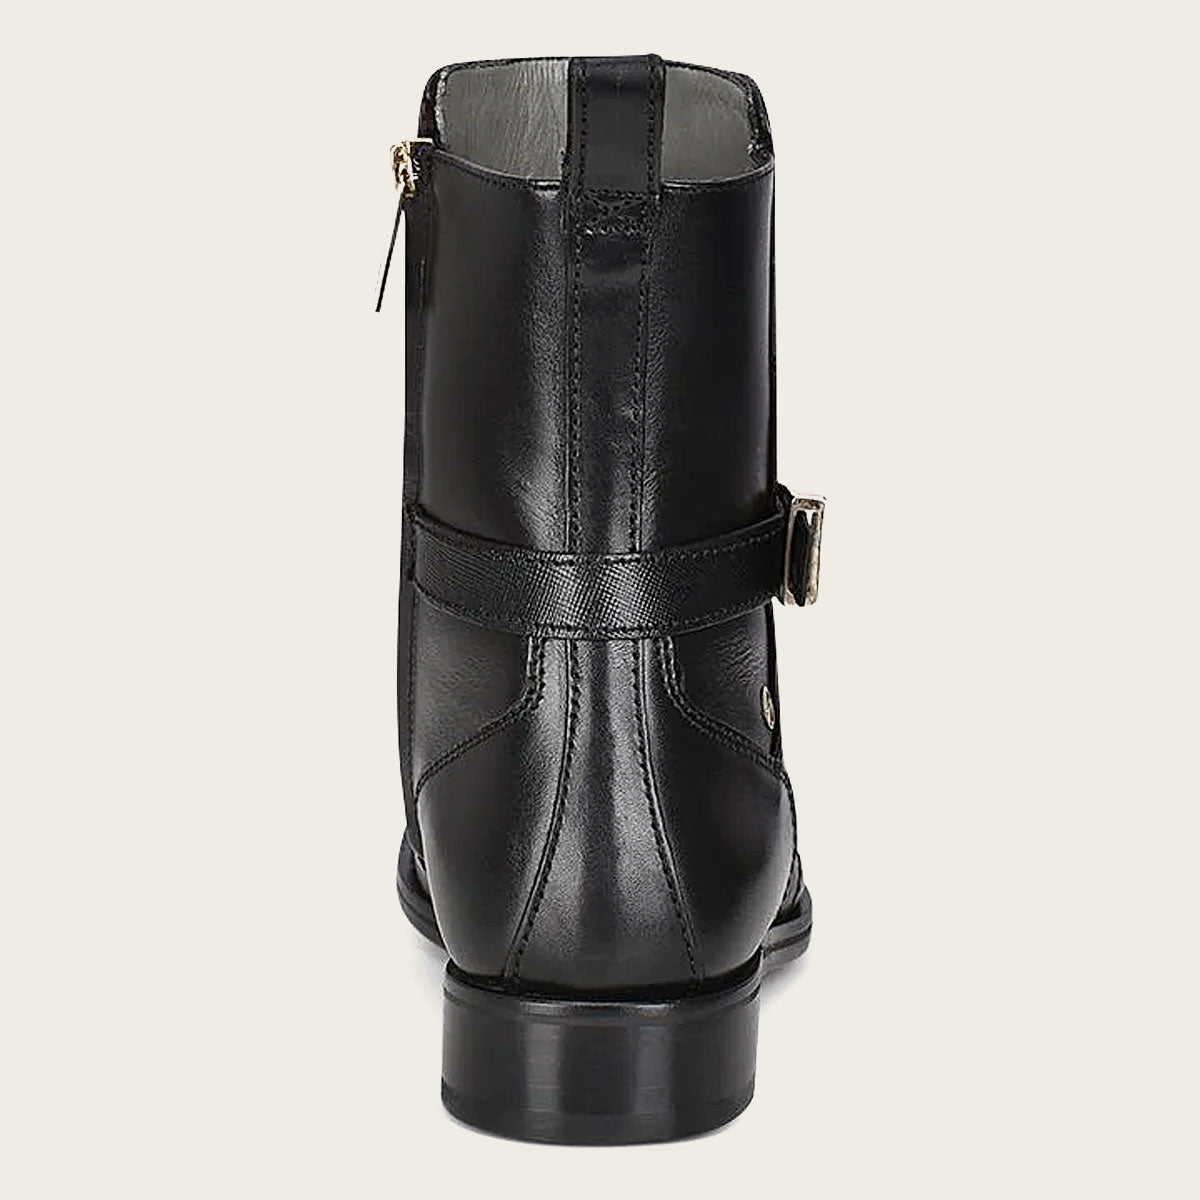 Hand-painted black leather engraved bootie. Unique and stylish. Shop now for a bold addition to your footwear collection